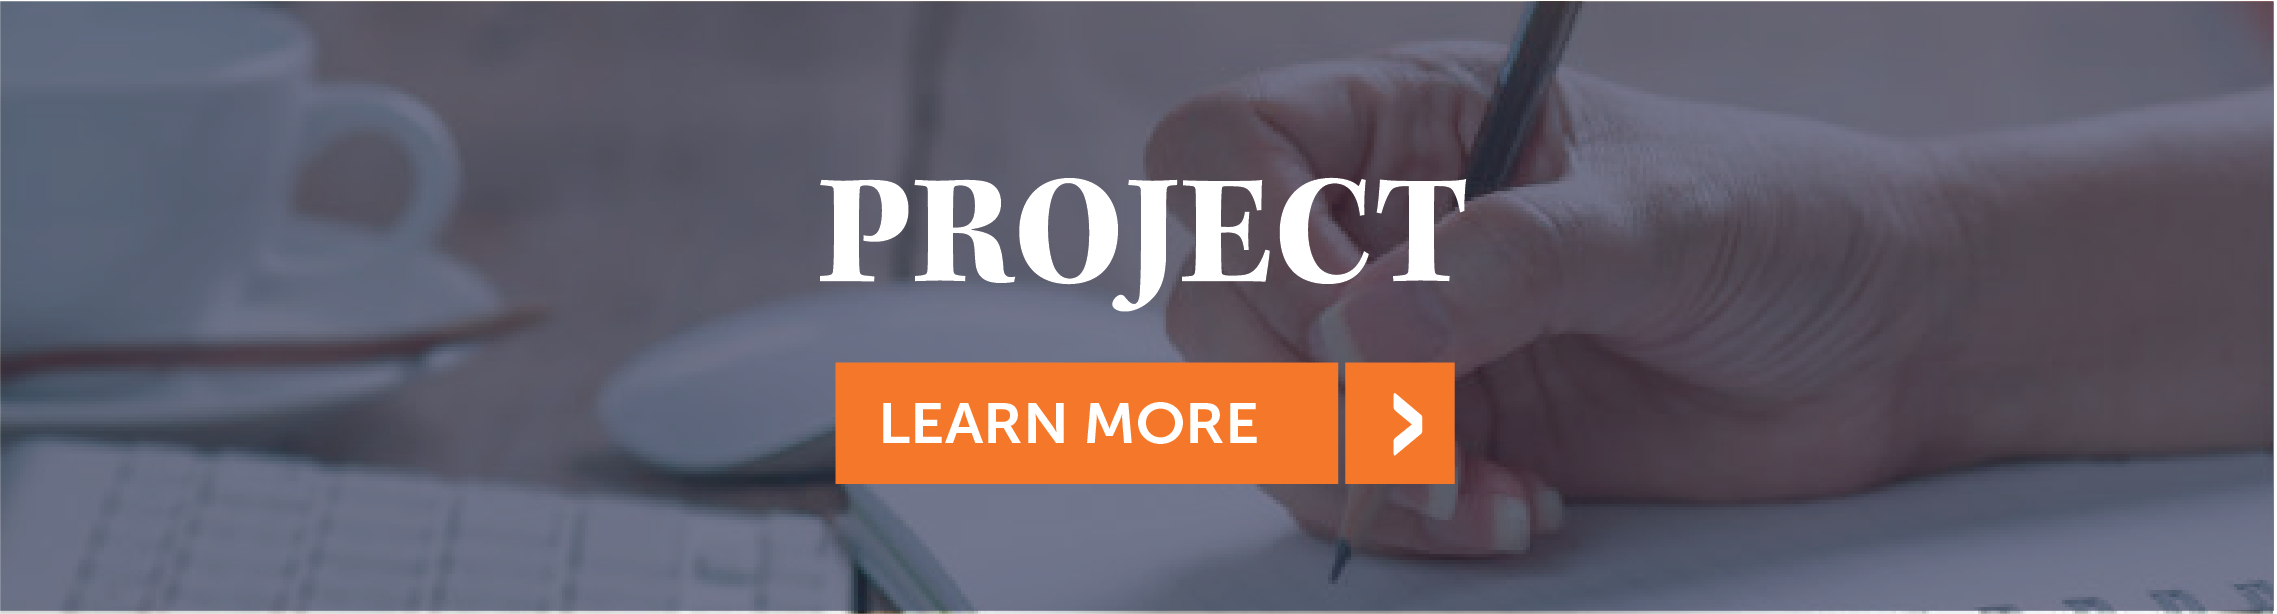 click here to learn more about projects